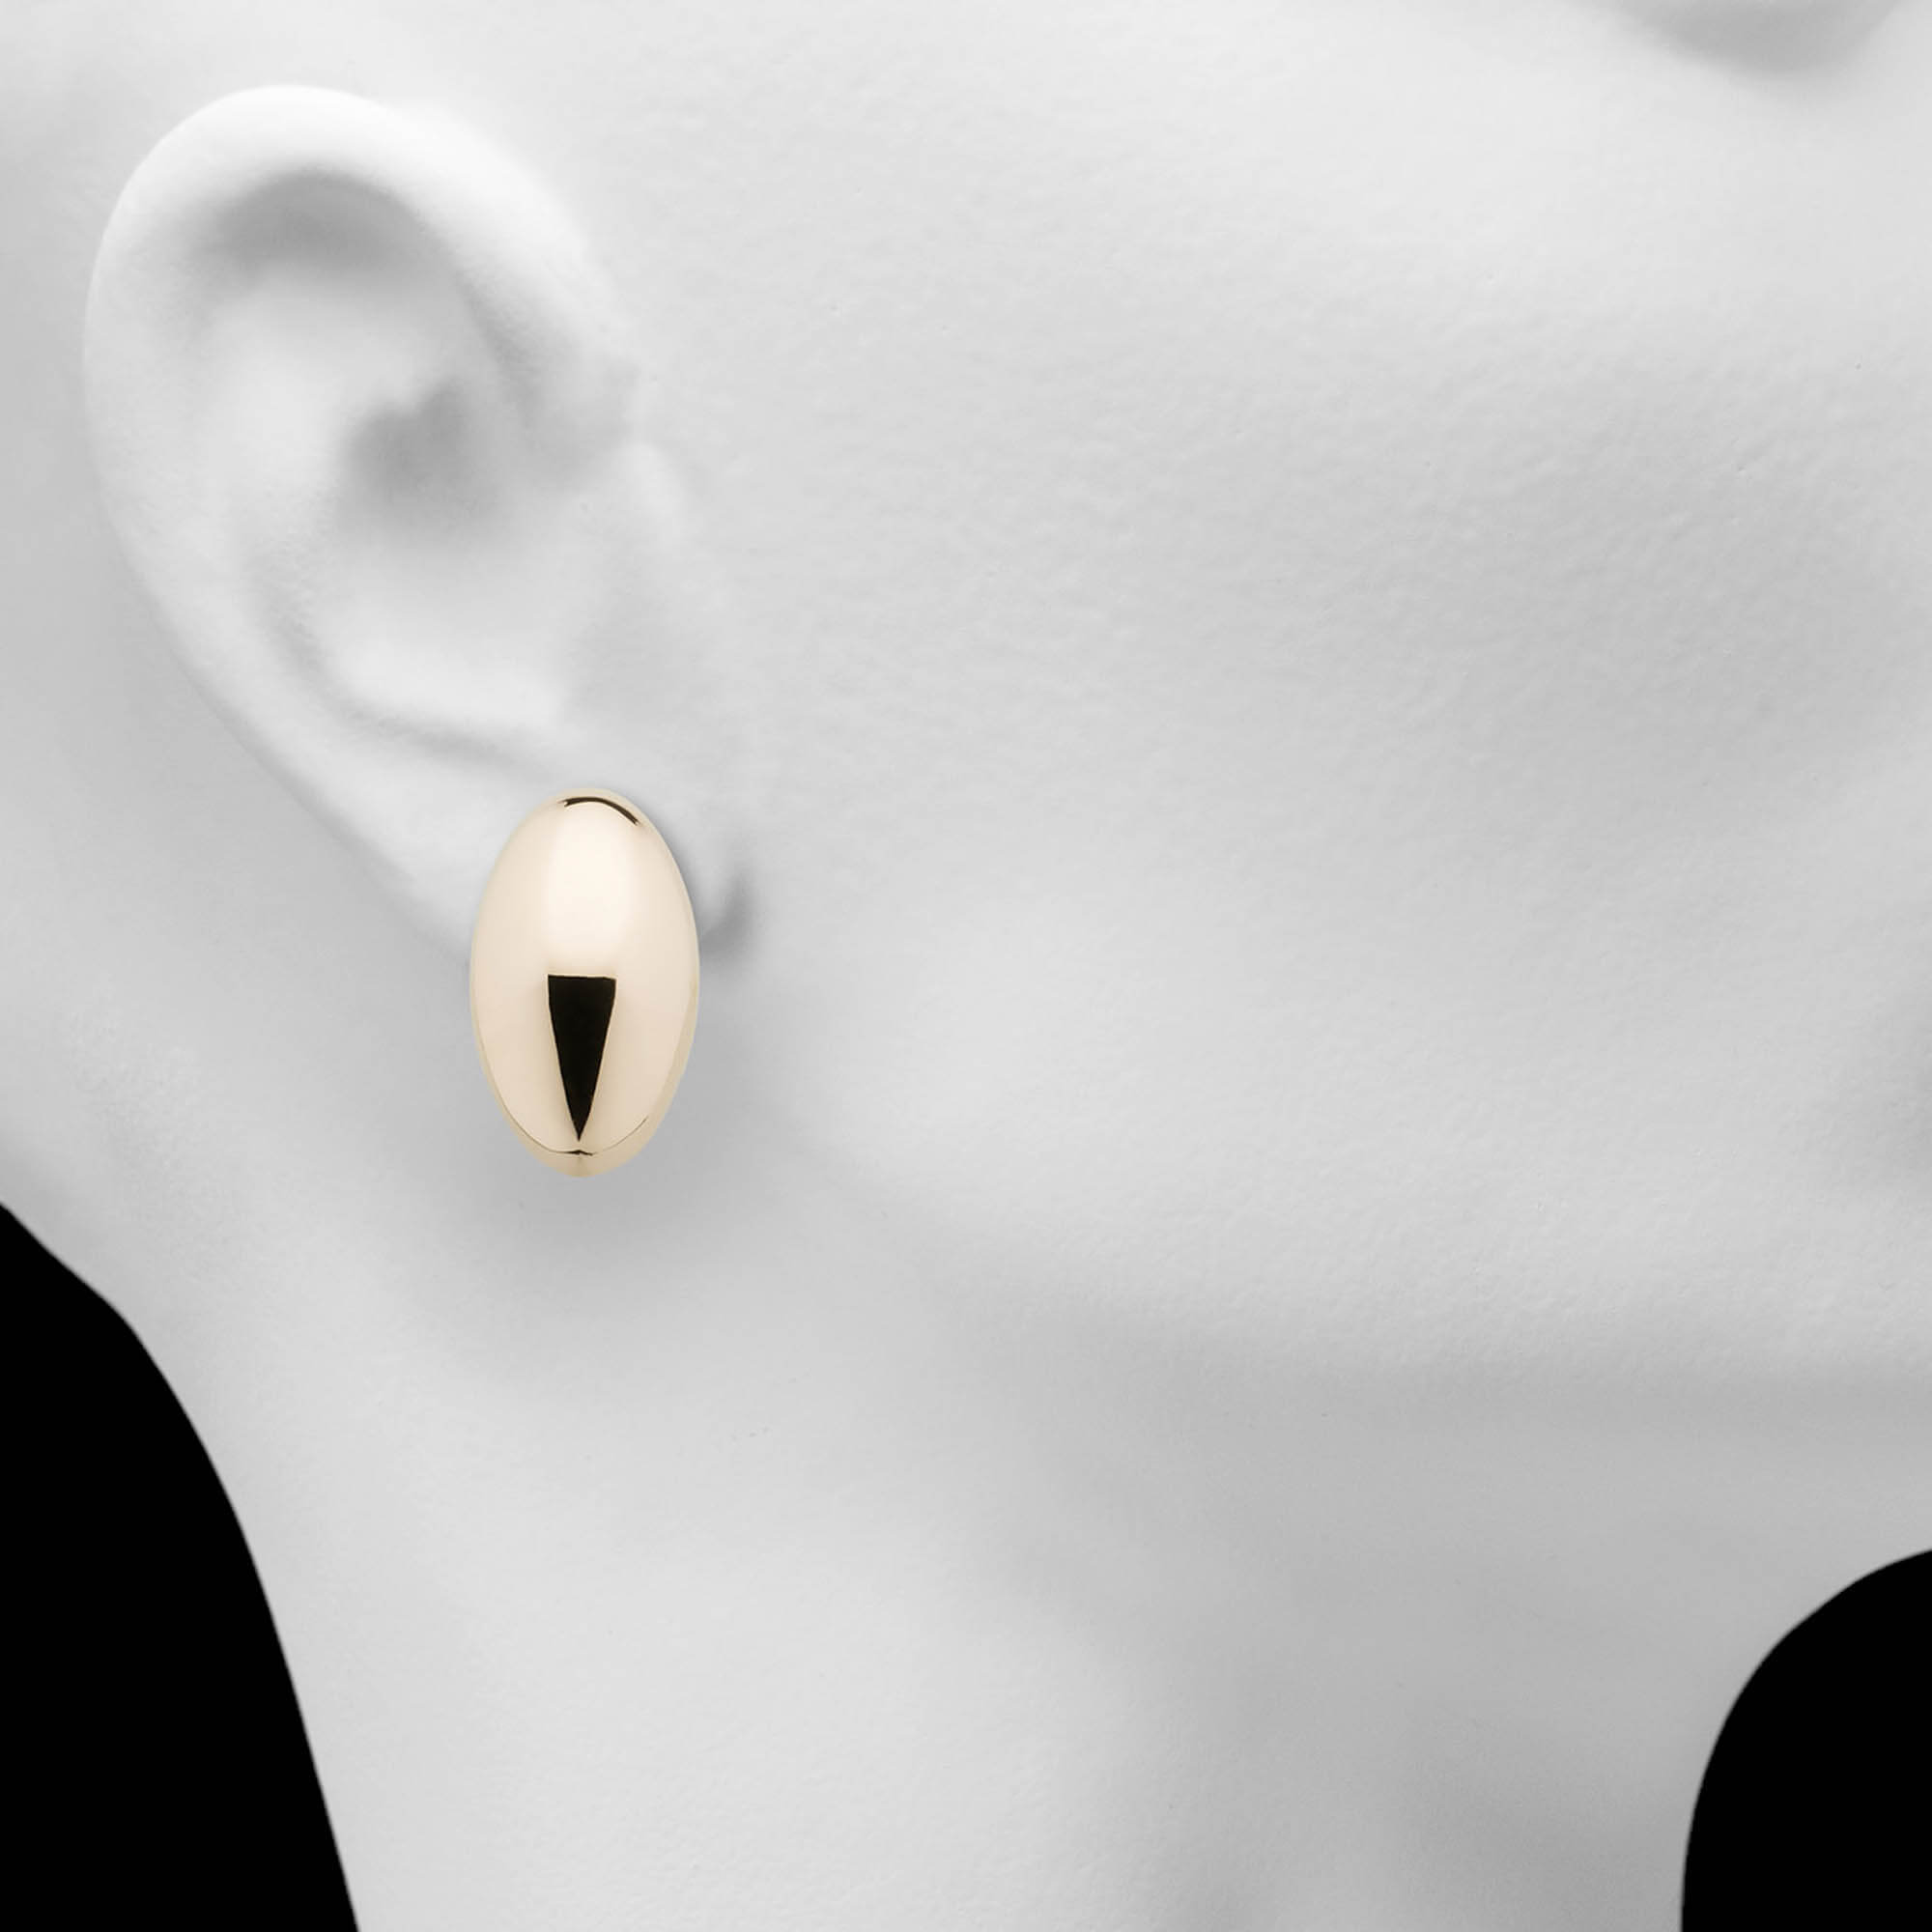 Gold and polished oval earrings